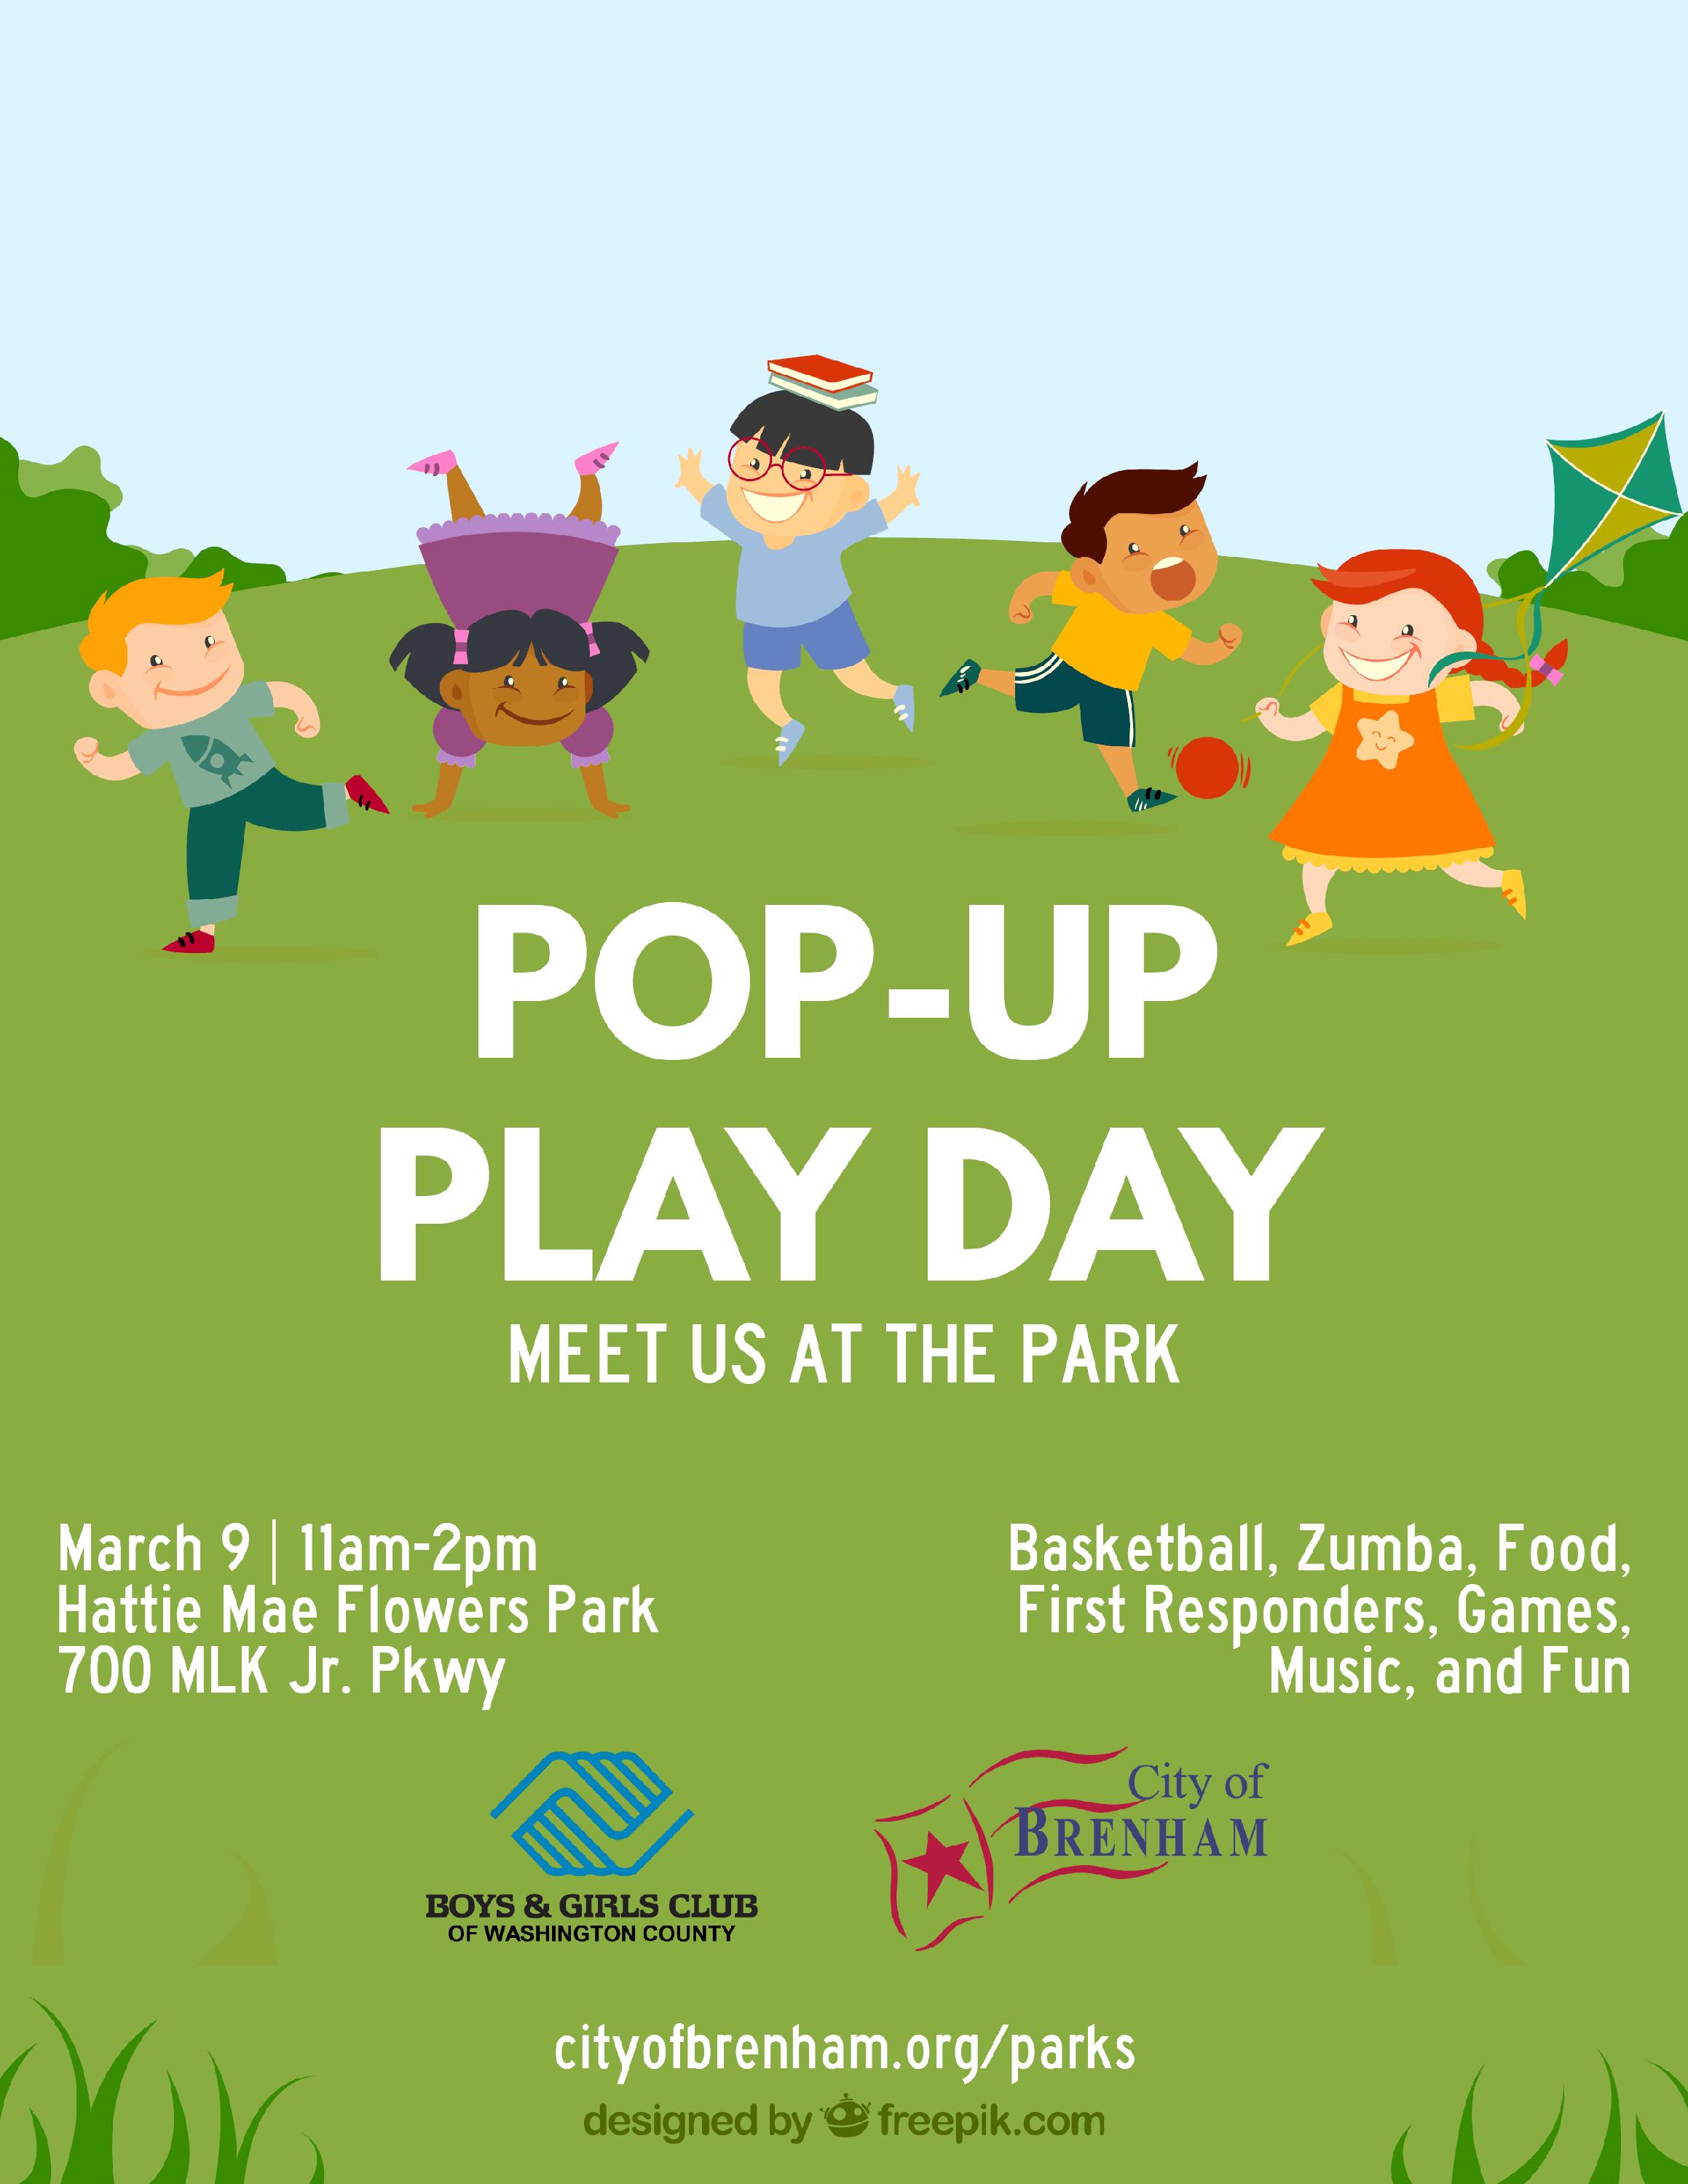 Pop up Play Day - Meet us at the park. March 9 | 11am-2pm. Hattie Mae Flowers Park at 700 MLK Jr. Pkwy. we will have Basketball, Zumba, Food, first responders, games, music, and fun. Boys and Girls club of washington county and the city of brenham